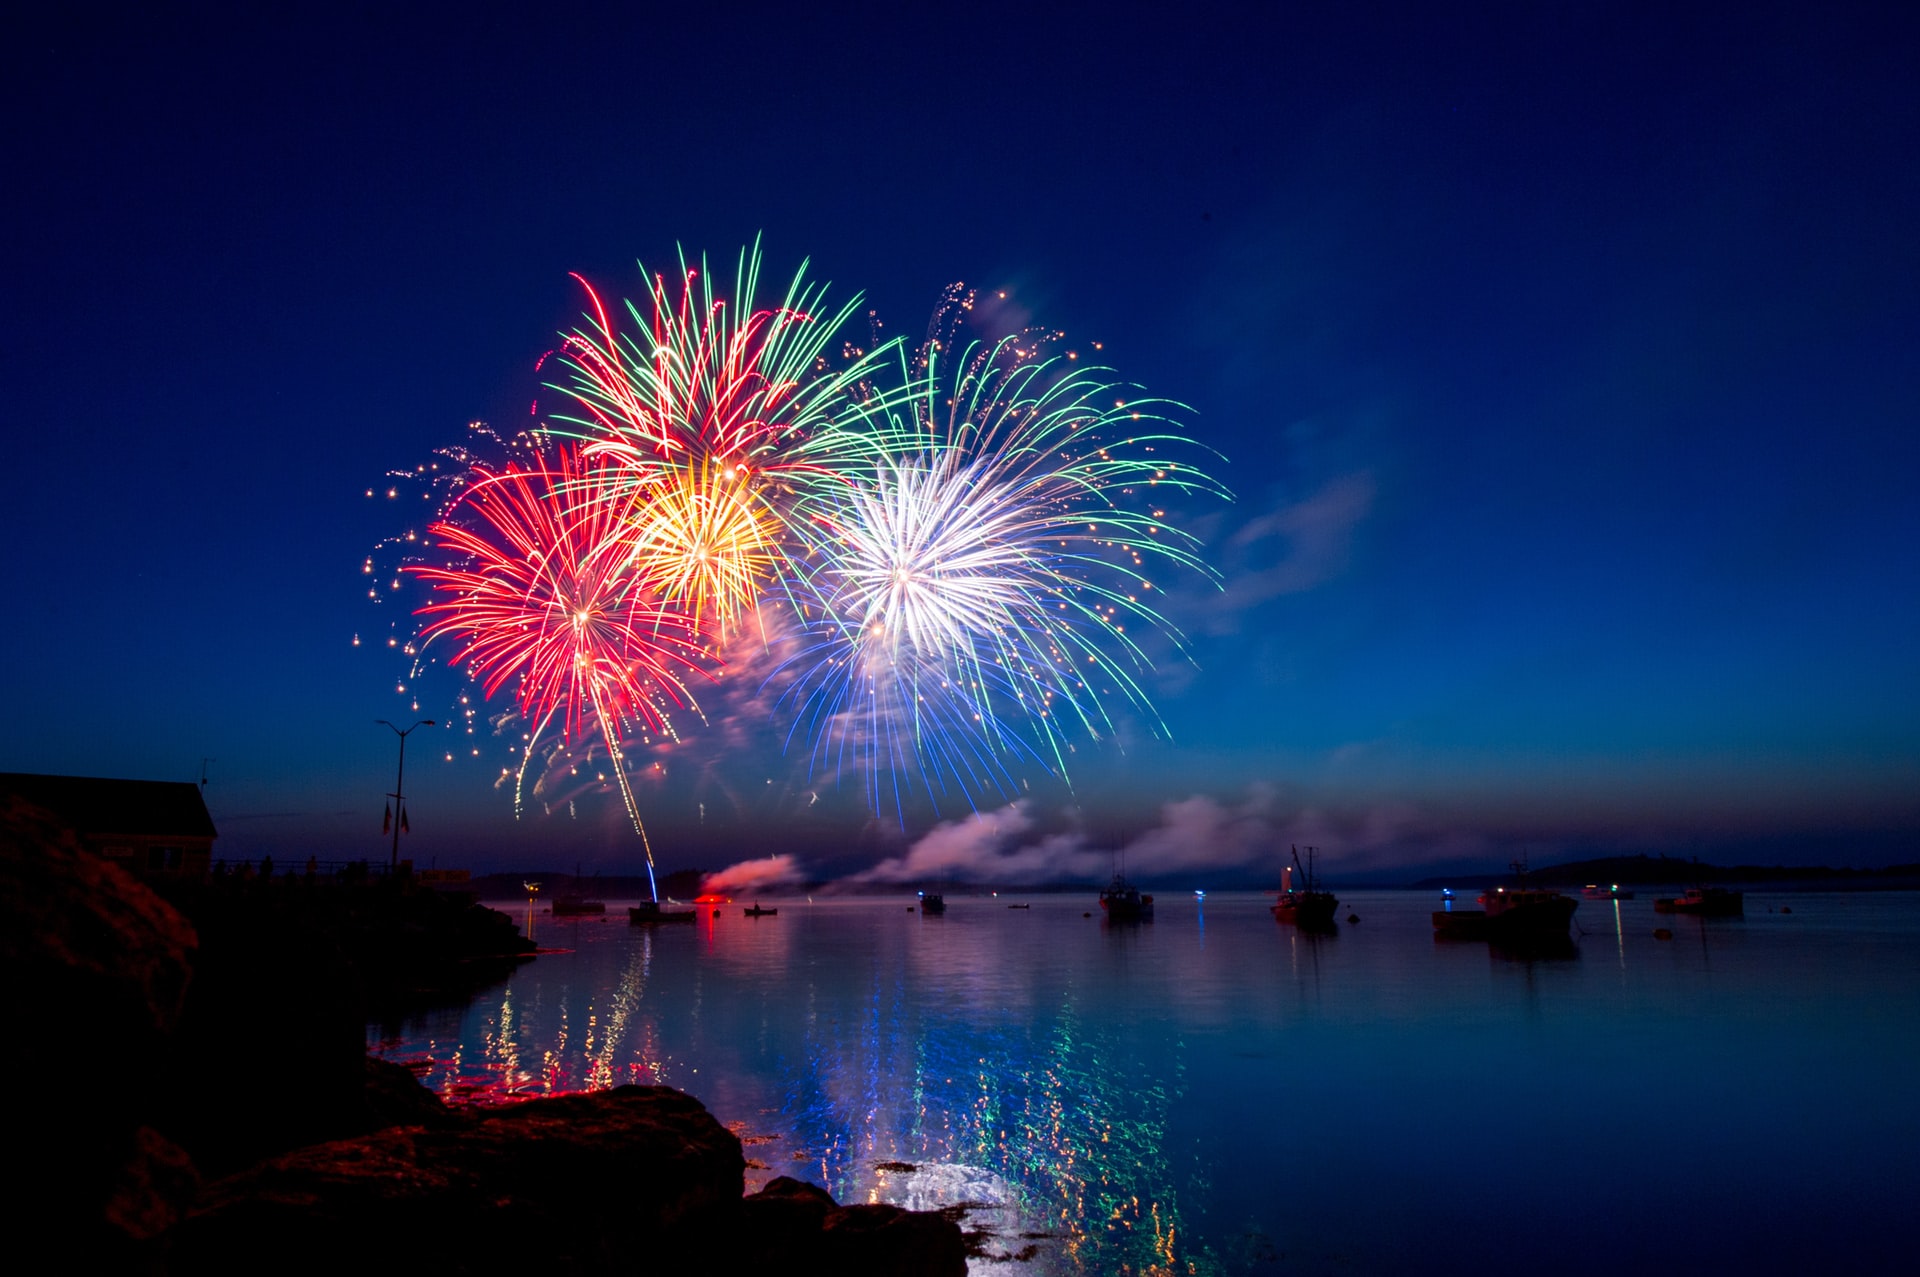 atmospheric photo of firework display over water, boats in the water